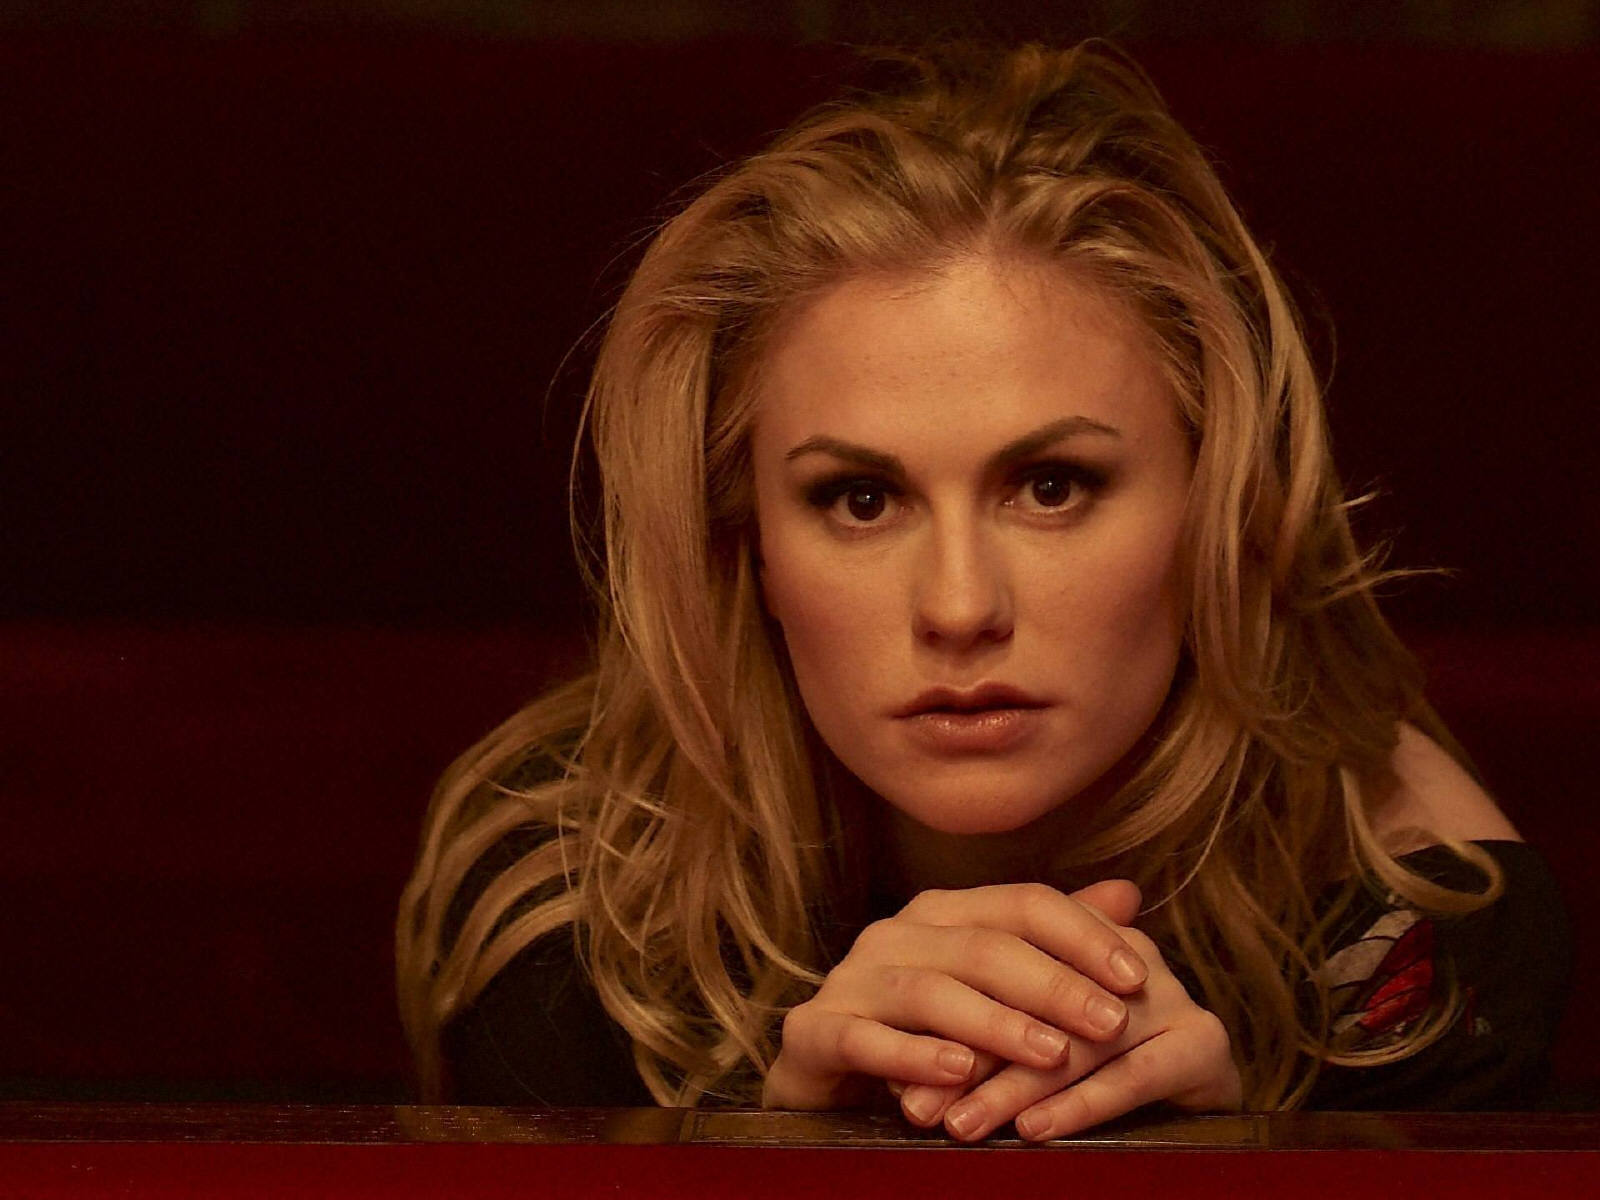 Anna Paquin HD Images and Wallpapers - Hollywood Actress